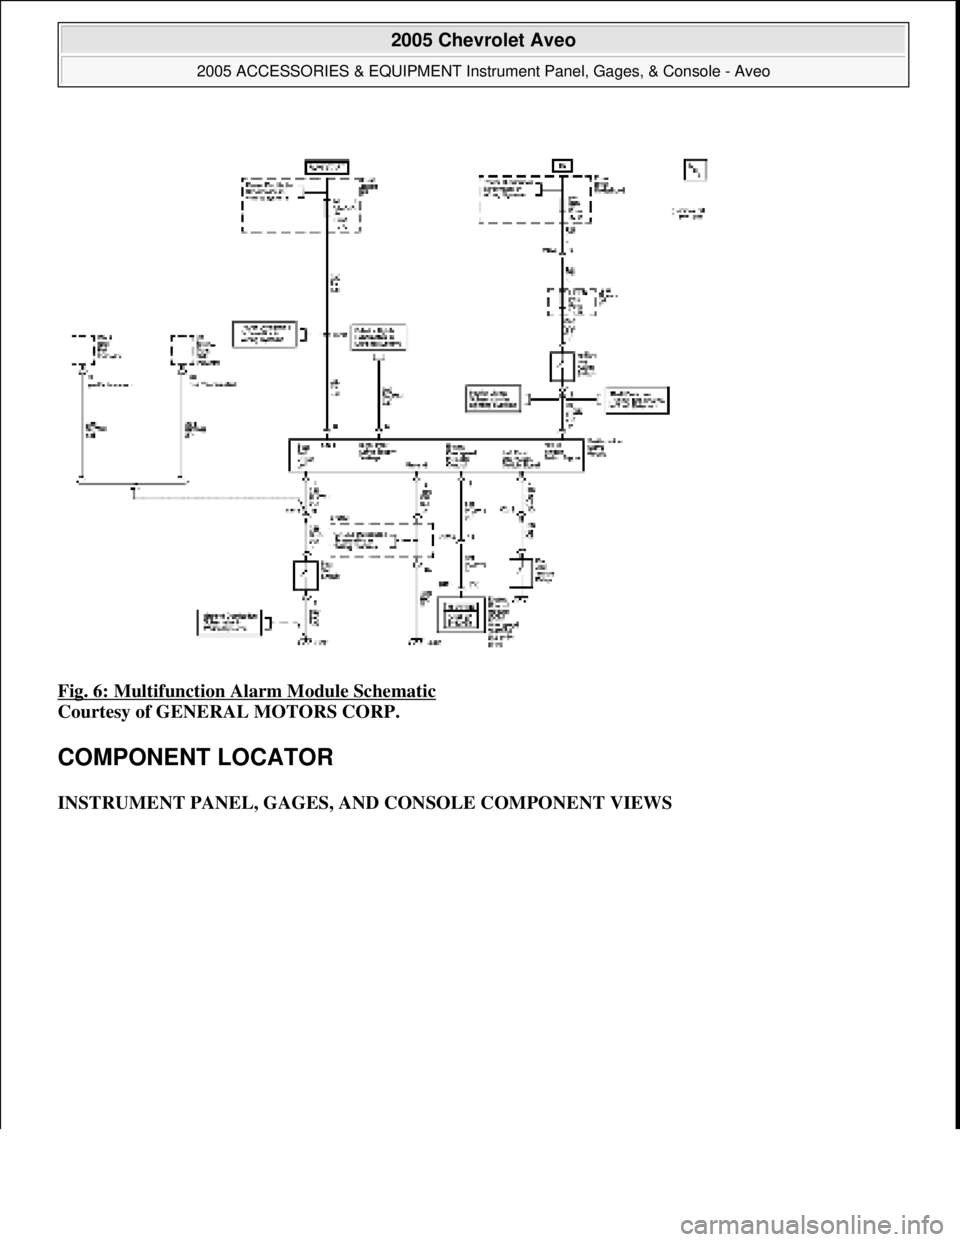 CHEVROLET AVEO 2002  Service Repair Manual Fig. 6: Multifunction Alarm Module Schematic 
Courtesy of GENERAL MOTORS CORP. 
COMPONENT LOCATOR 
INSTRUMENT PANEL, GAGES, AND CONSOLE COMPONENT VIEWS 
 
2005 Chevrolet Aveo 
2005 ACCESSORIES & EQUIP